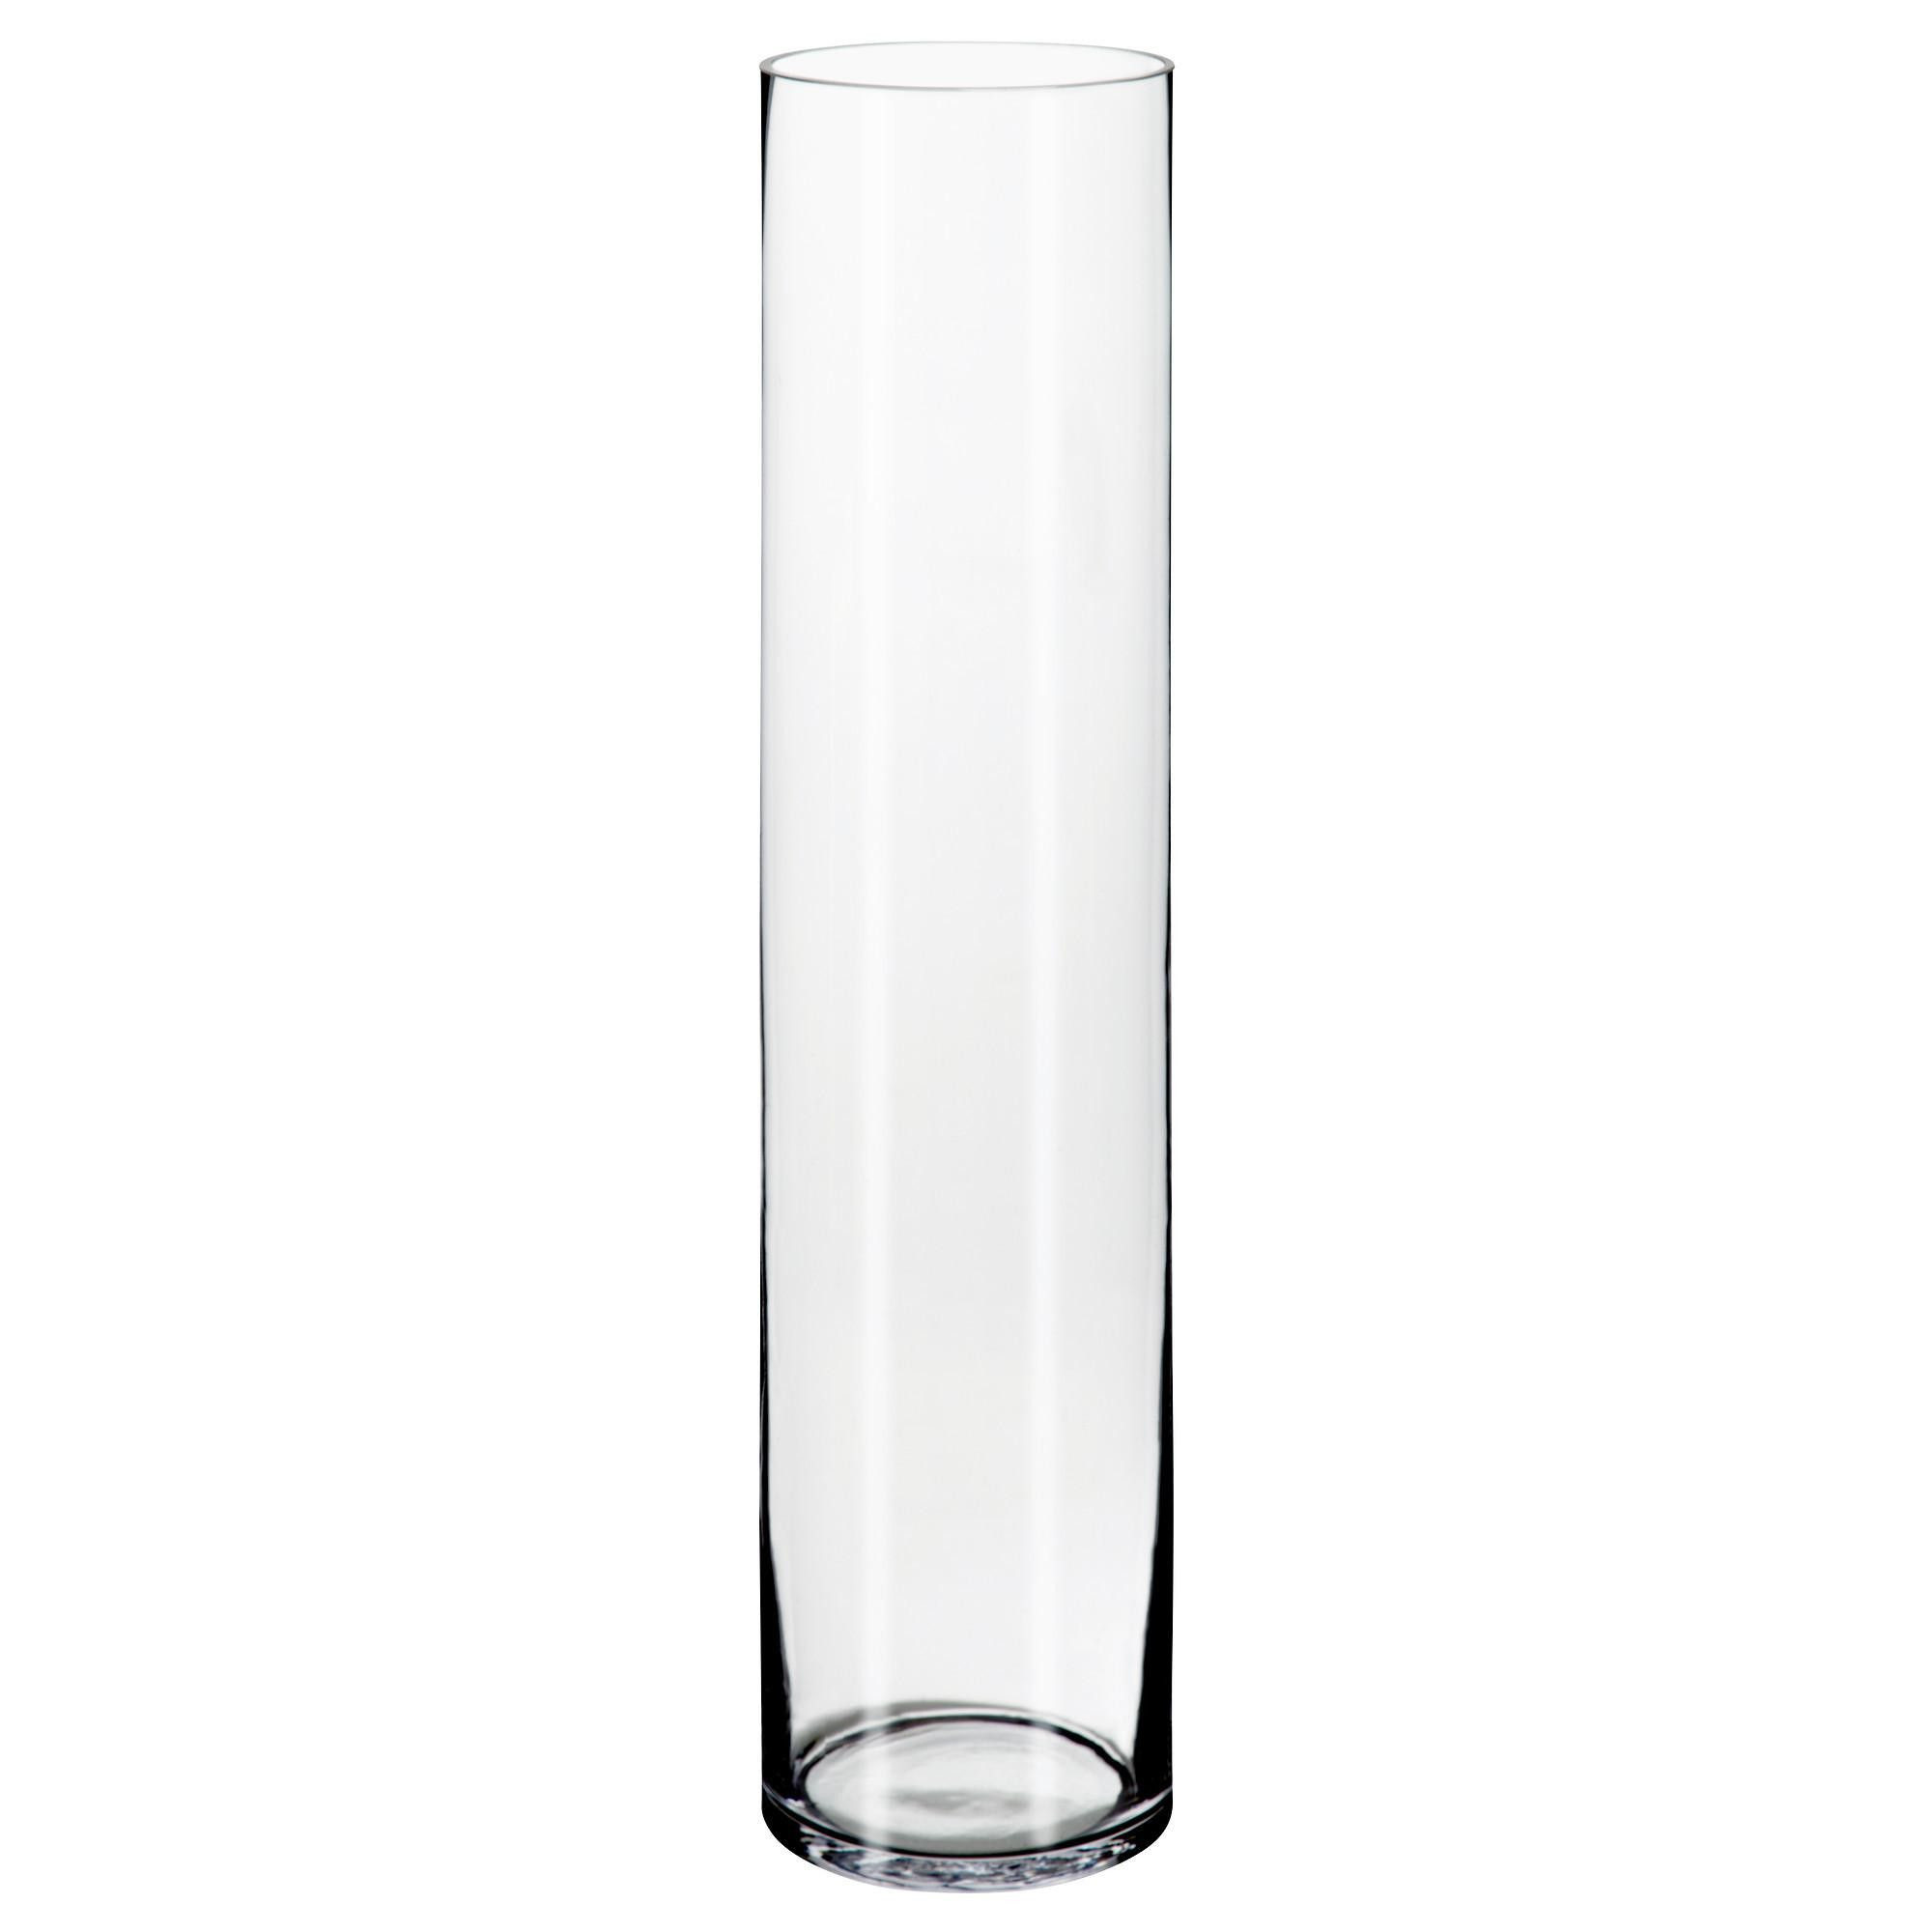 glass cylinder vases 9 in of 50 smoked glass vase the weekly world with regard to coloring colored glass vases elegant living room vase glass fresh